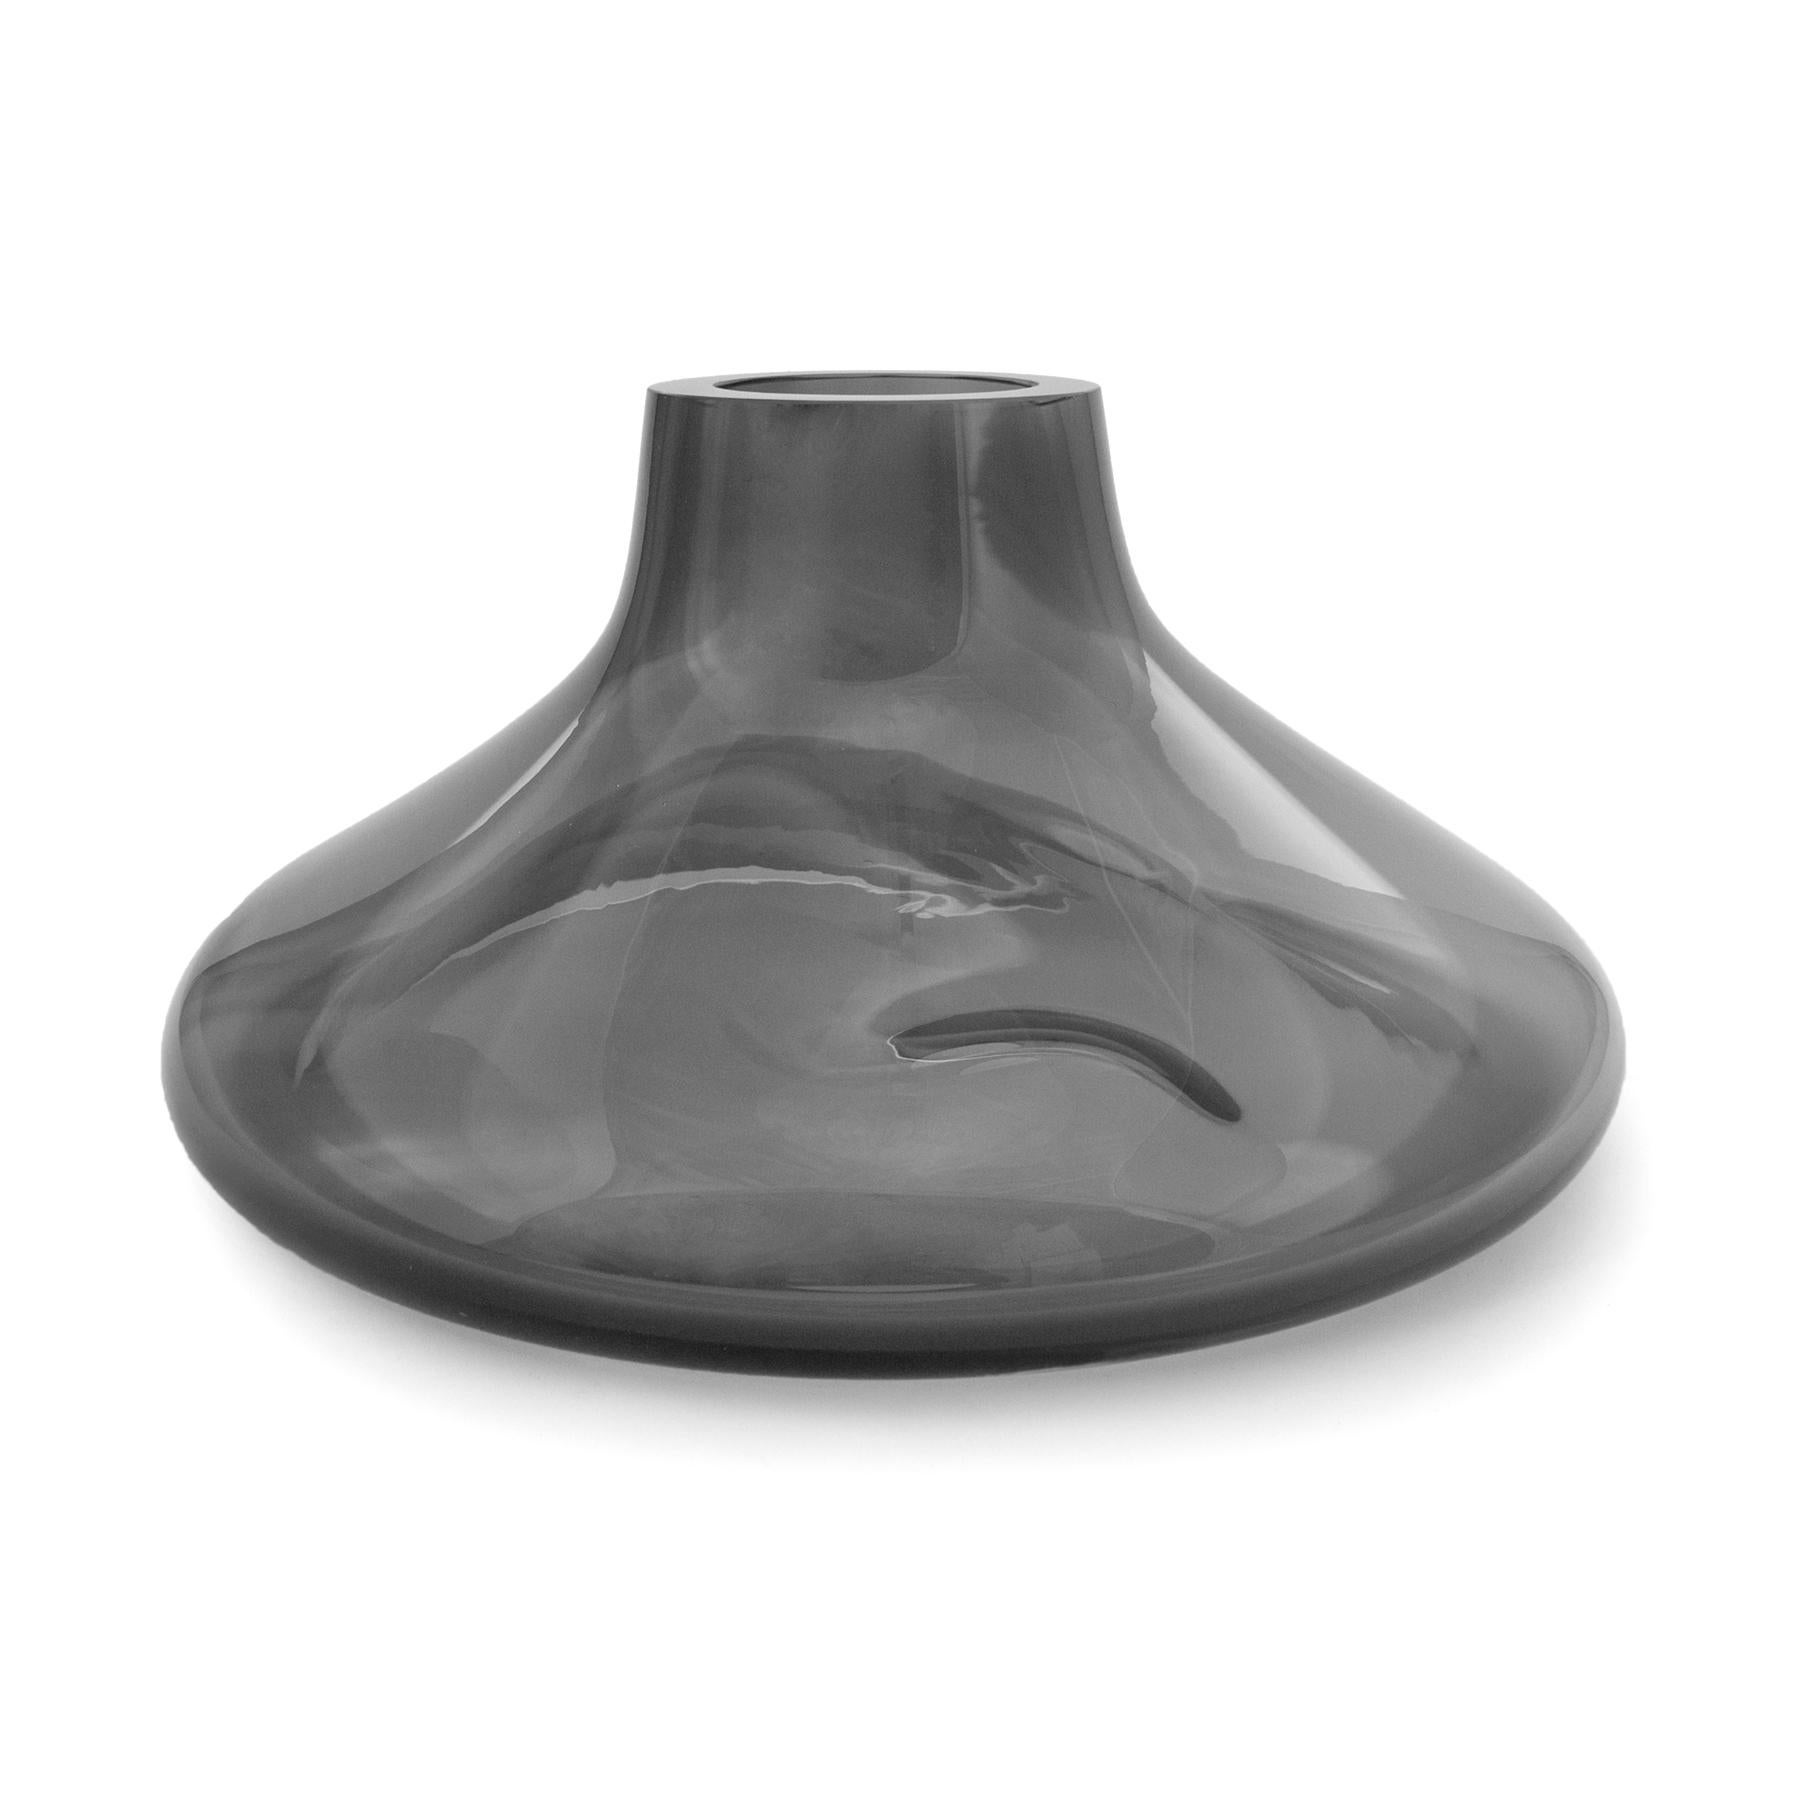 Makemake silver smoke L vase + bowl by Eloa.
No UL listed 
Material: Glass
Dimensions: D40 x W40 x H25 cm
Also Available in different colours and dimensions.

Makemake is reminiscent of Jupiter‘s ring. The object was designed with a double